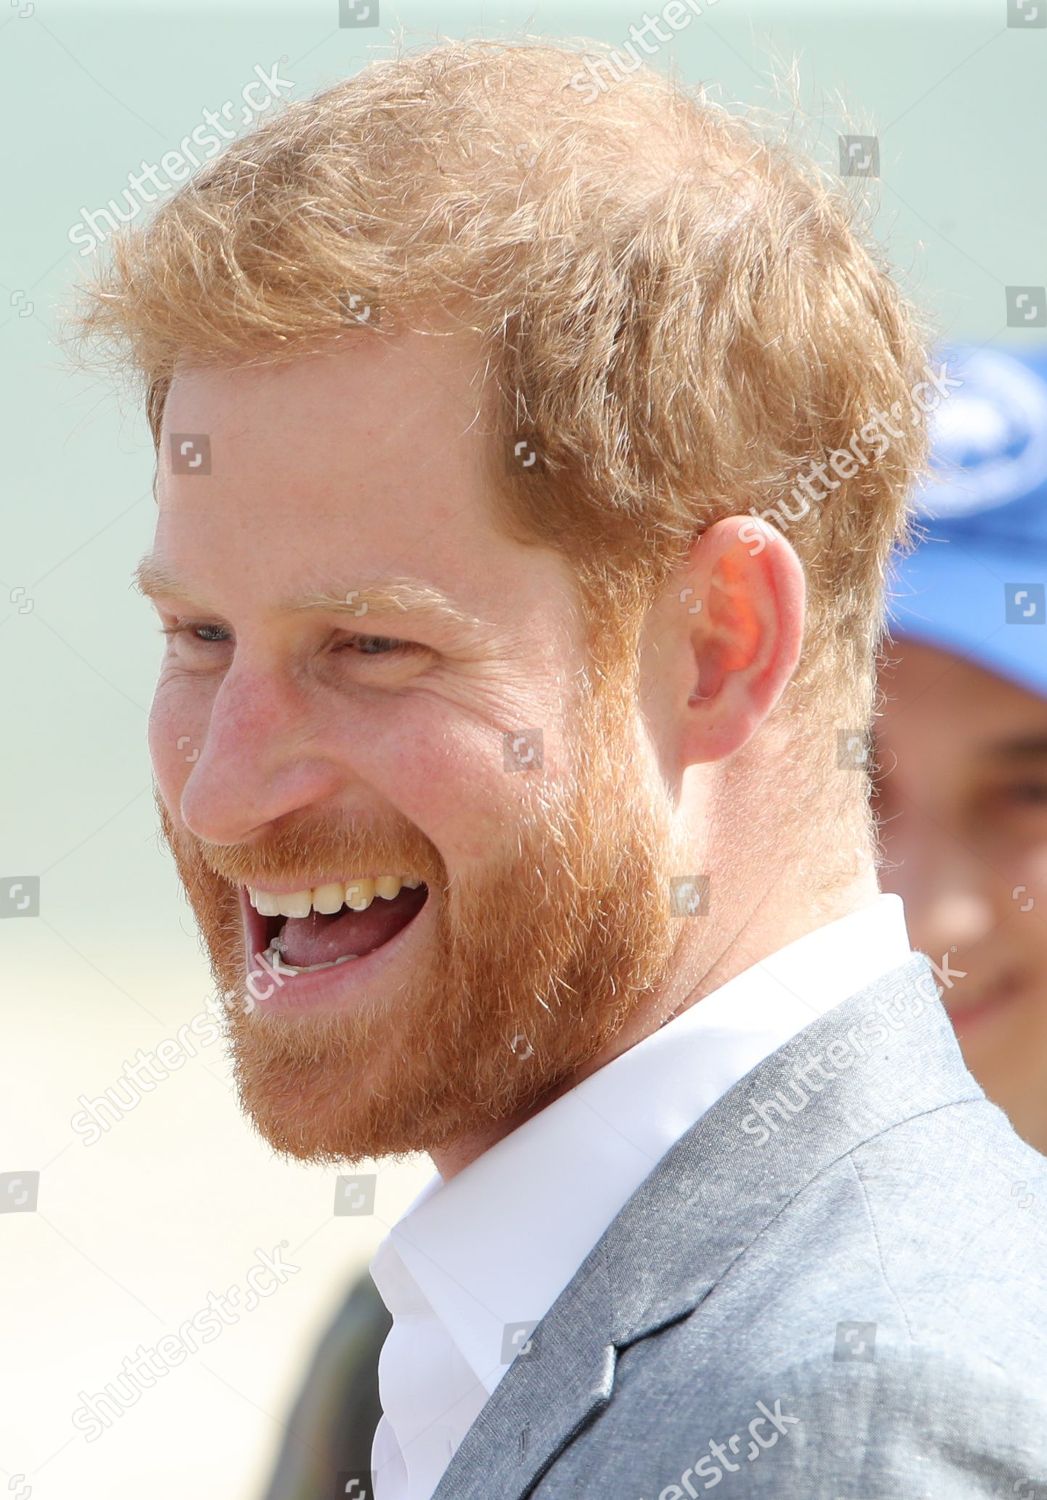 prince-harry-and-meghan-duchess-of-sussex-tour-of-australia-shutterstock-editorial-9936539di.jpg